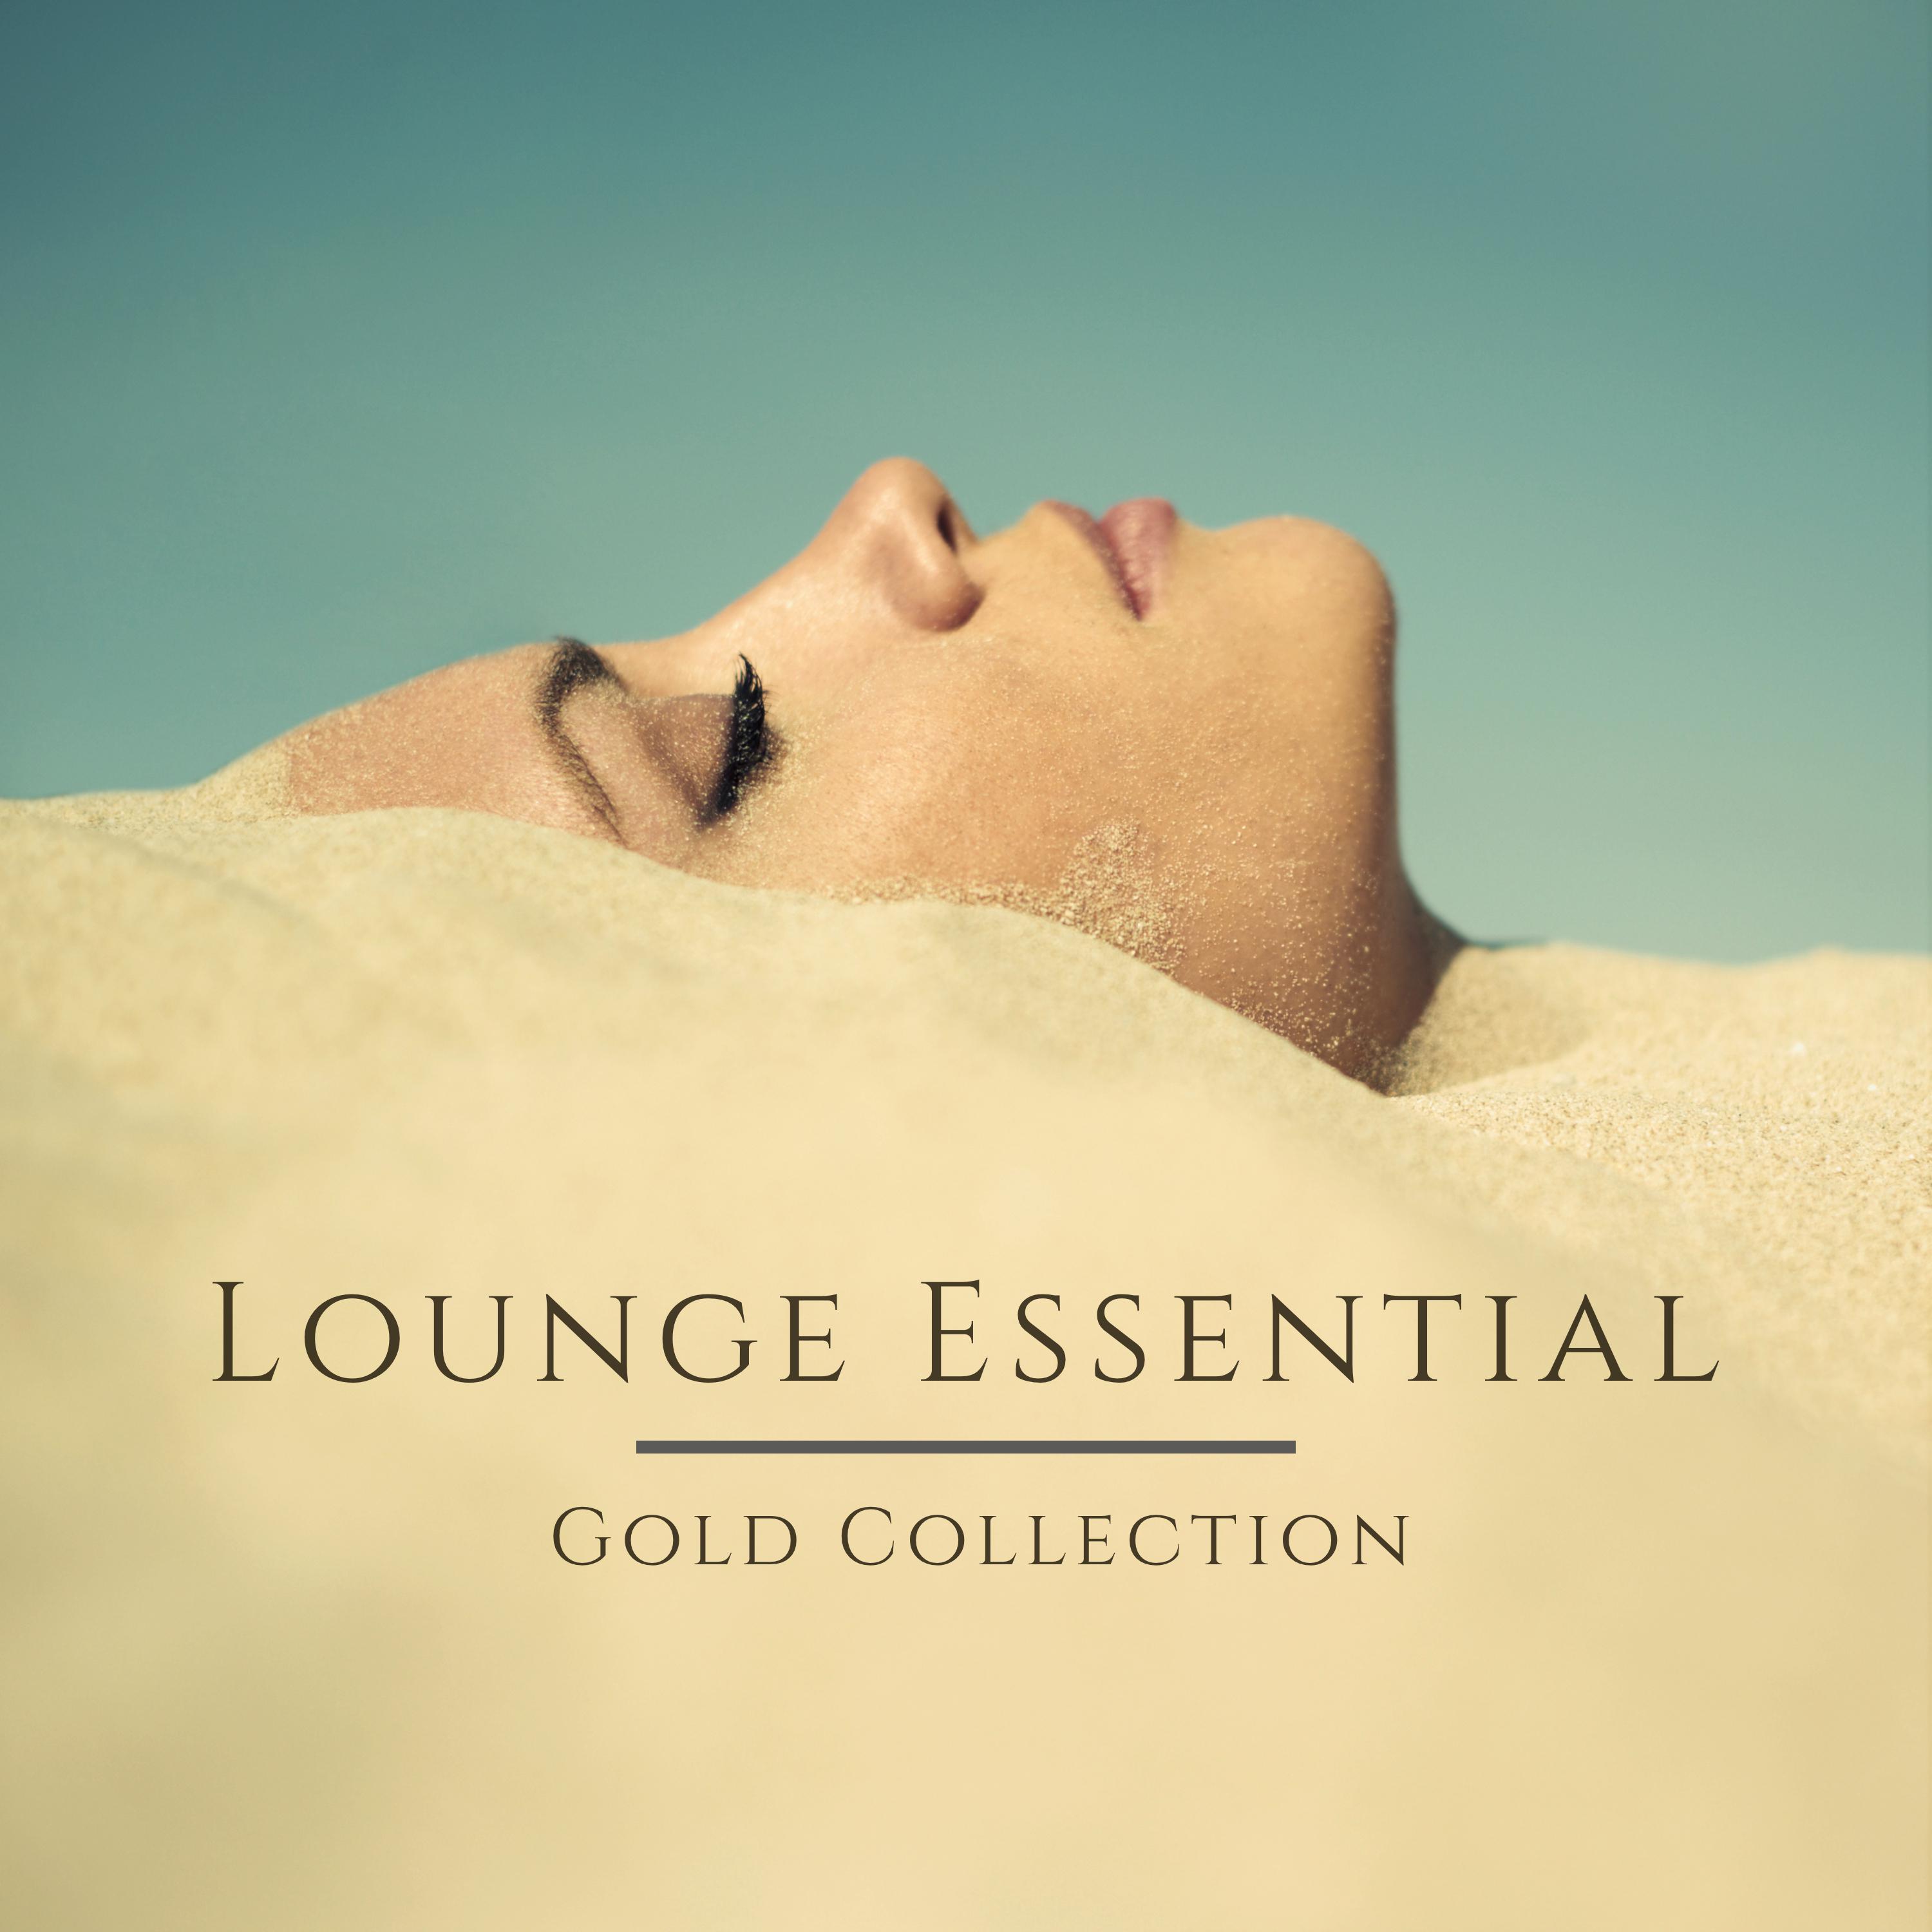 Lounge Essential Gold Collection  Best of Lounge for Summer Parties